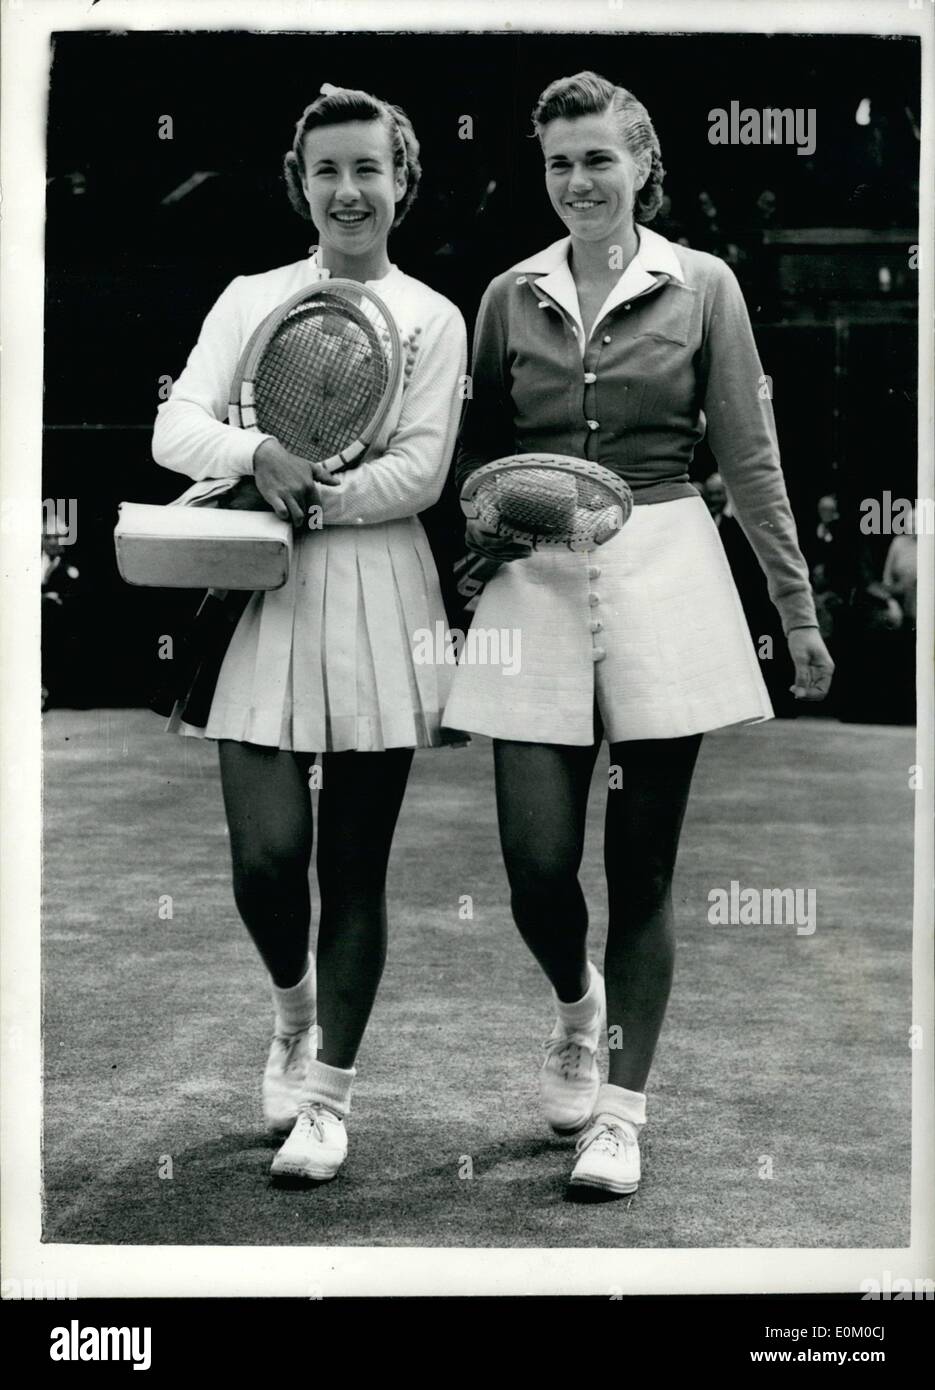 Feb. 02, 1953 - Maureen Connolly Beats Shirley Fry.. Ladies Singles Semi-Final at Wimbledon : Picture Shows: Shirley Fry (right) and Maureen Connolly both of the United States seen walking onto court at Wimbledon this afternoon for their match in the Semi-final of the Ladies Singles event.. Maureen Won 6-1;6-1. Stock Photo